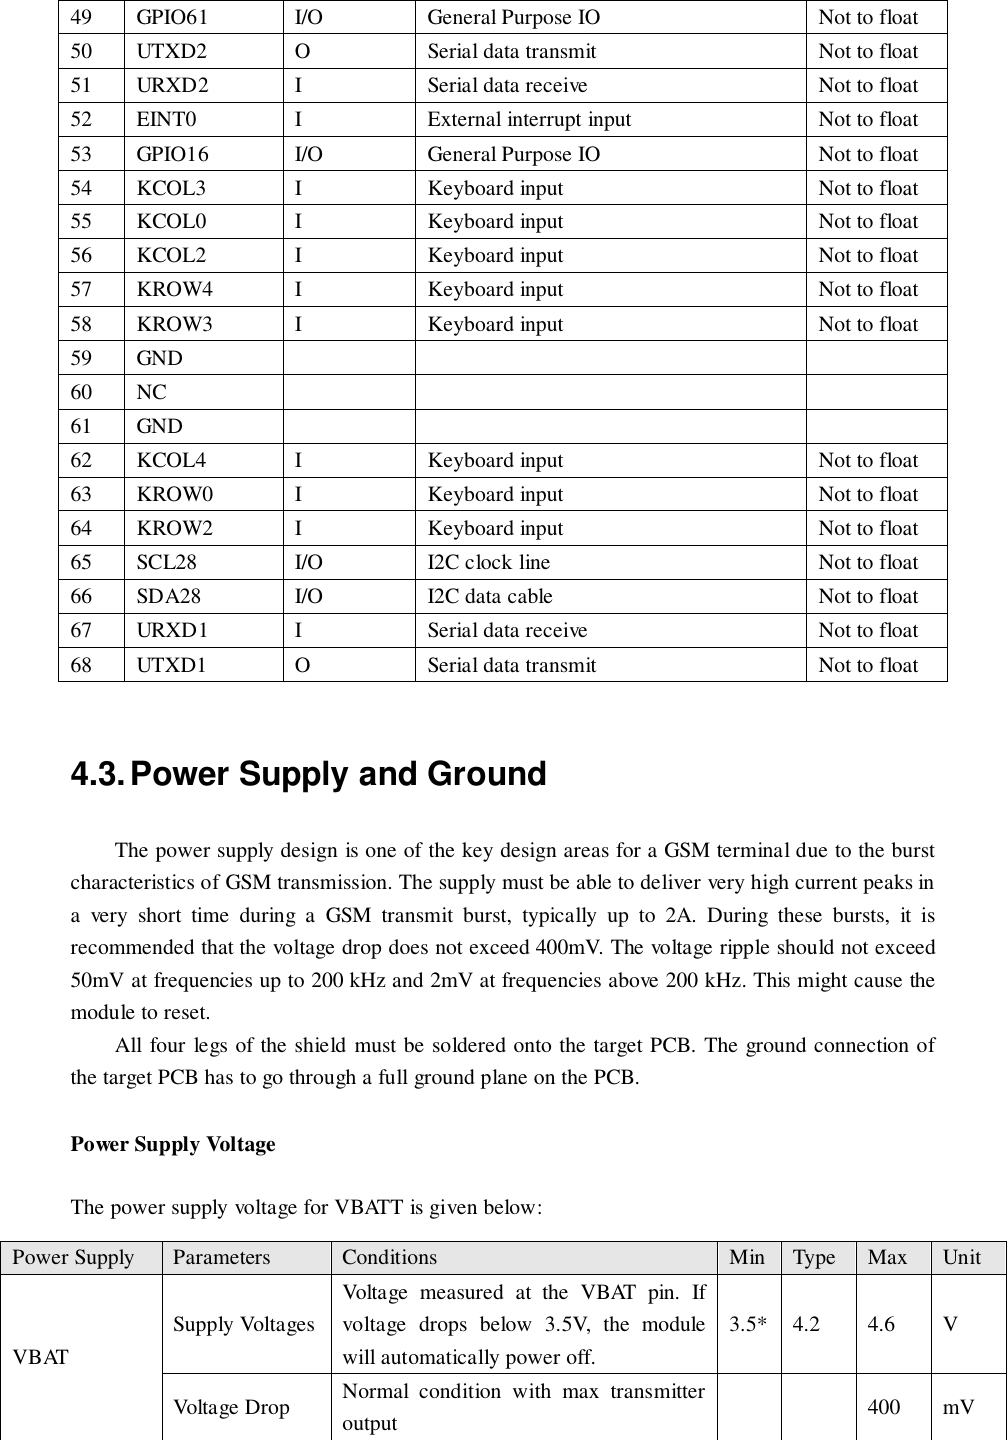  4.3. Power Supply and Ground The power supply design is one of the key design areas for a GSM terminal due to the burst characteristics of GSM transmission. The supply must be able to deliver very high current peaks in a  very  short  time  during  a  GSM  transmit  burst,  typically  up  to  2A.  During  these  bursts,  it  is recommended that the voltage drop does not exceed 400mV. The voltage ripple should not exceed 50mV at frequencies up to 200 kHz and 2mV at frequencies above 200 kHz. This might cause the module to reset. All four legs of the shield must be soldered onto the target PCB. The ground connection of the target PCB has to go through a full ground plane on the PCB. Power Supply Voltage The power supply voltage for VBATT is given below: 49 GPIO61 I/O General Purpose IO Not to float 50 UTXD2 O Serial data transmit Not to float 51 URXD2 I Serial data receive Not to float 52 EINT0 I External interrupt input Not to float 53 GPIO16 I/O General Purpose IO Not to float 54 KCOL3 I Keyboard input Not to float 55 KCOL0 I Keyboard input Not to float 56 KCOL2 I Keyboard input Not to float 57 KROW4 I Keyboard input Not to float 58 KROW3 I Keyboard input Not to float 59 GND    60 NC    61 GND    62 KCOL4 I Keyboard input Not to float 63 KROW0 I Keyboard input Not to float 64 KROW2 I Keyboard input Not to float 65 SCL28 I/O I2C clock line Not to float 66 SDA28 I/O I2C data cable Not to float 67 URXD1 I Serial data receive Not to float 68 UTXD1 O Serial data transmit Not to float Power Supply Parameters Conditions Min Type Max Unit VBAT Supply Voltages Voltage  measured  at  the  VBAT  pin.  If voltage  drops  below  3.5V,  the  module will automatically power off. 3.5* 4.2 4.6 V Voltage Drop Normal  condition  with  max  transmitter output   400 mV 